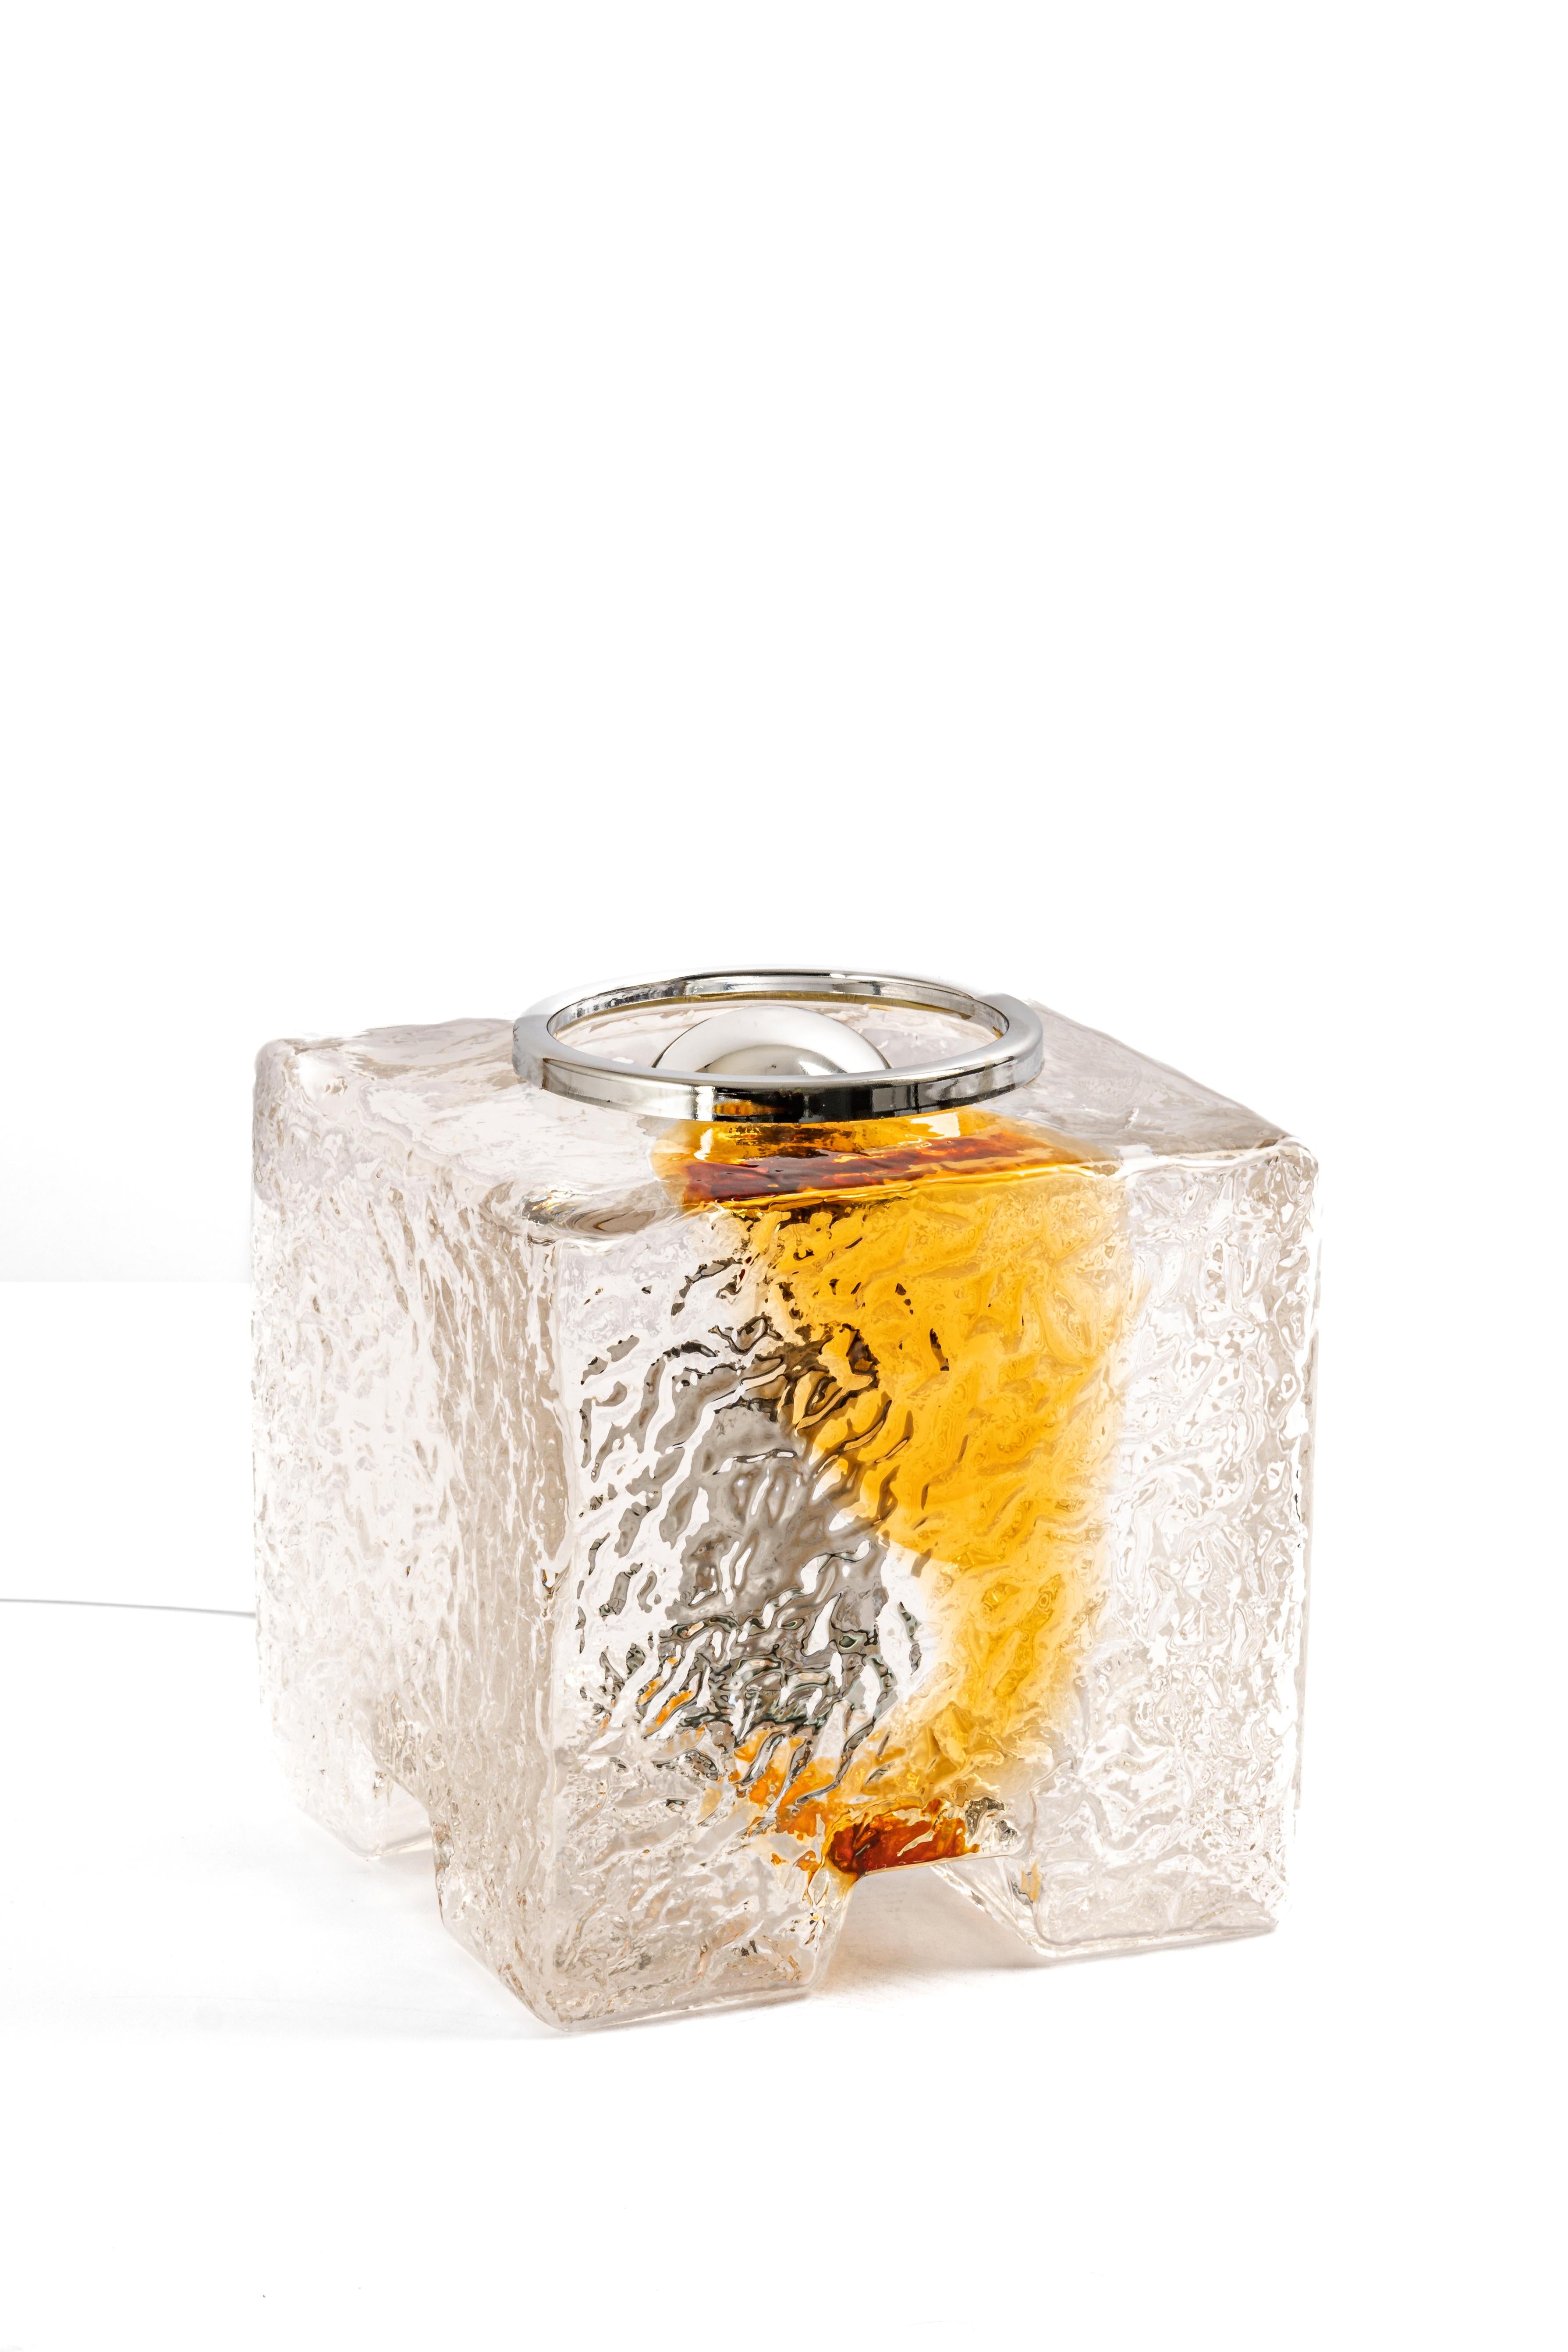 Wonderful large midcentury Cube table lamps by VeArt, Italy, 1970s.
Made of a single piece of blown and cased glass with yellow inclusions that have been applied in an abstract expressionist manner.
Manufacturer: VeArt

Stunning glass form and